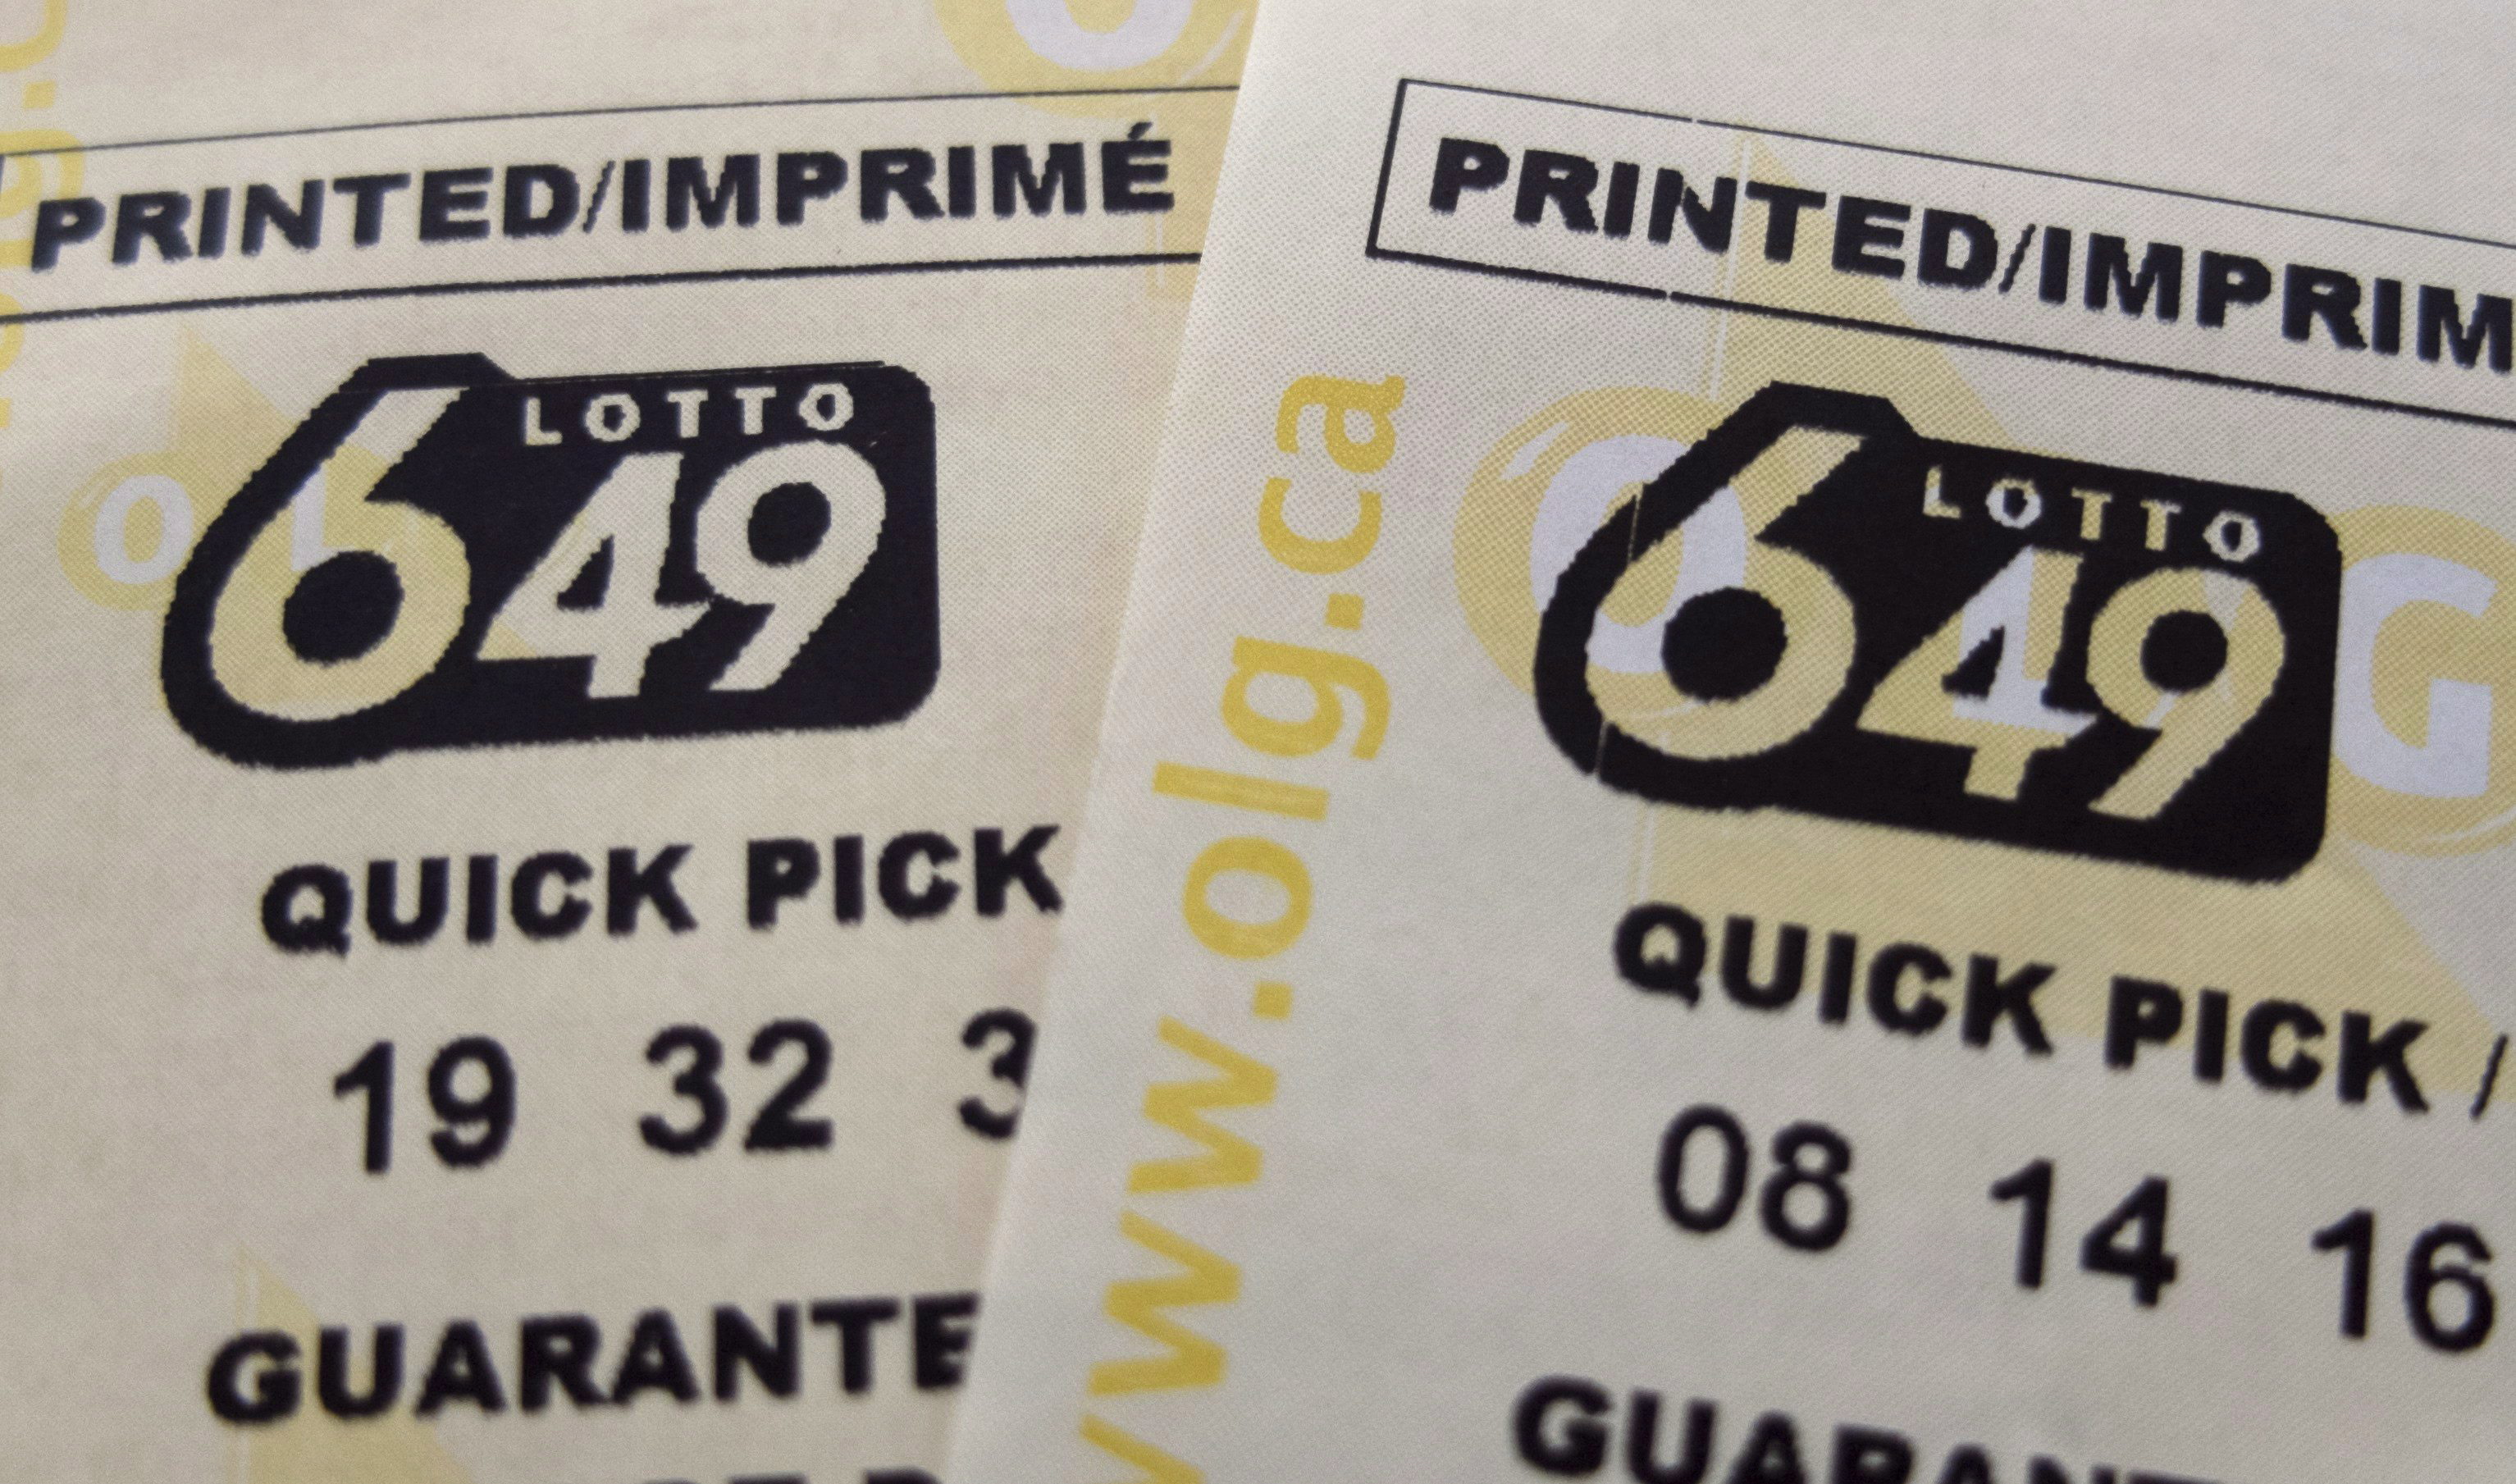 lotto 6 49 historical winning numbers